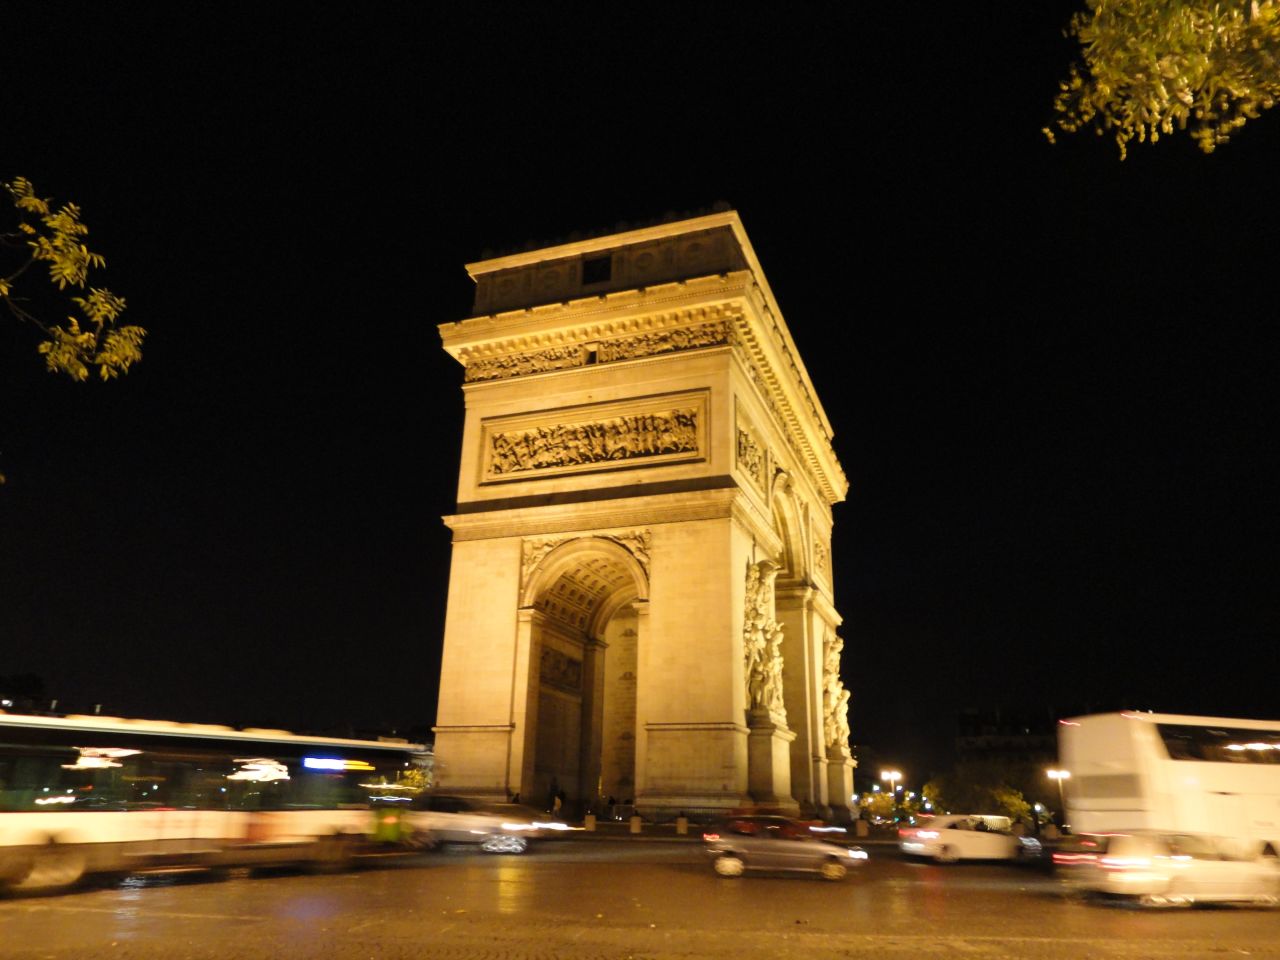 David Hetzler snapped this shot of the Arc de Triomphe while taking an evening stroll during his time in the city. "The beauty of it at night is impressive."